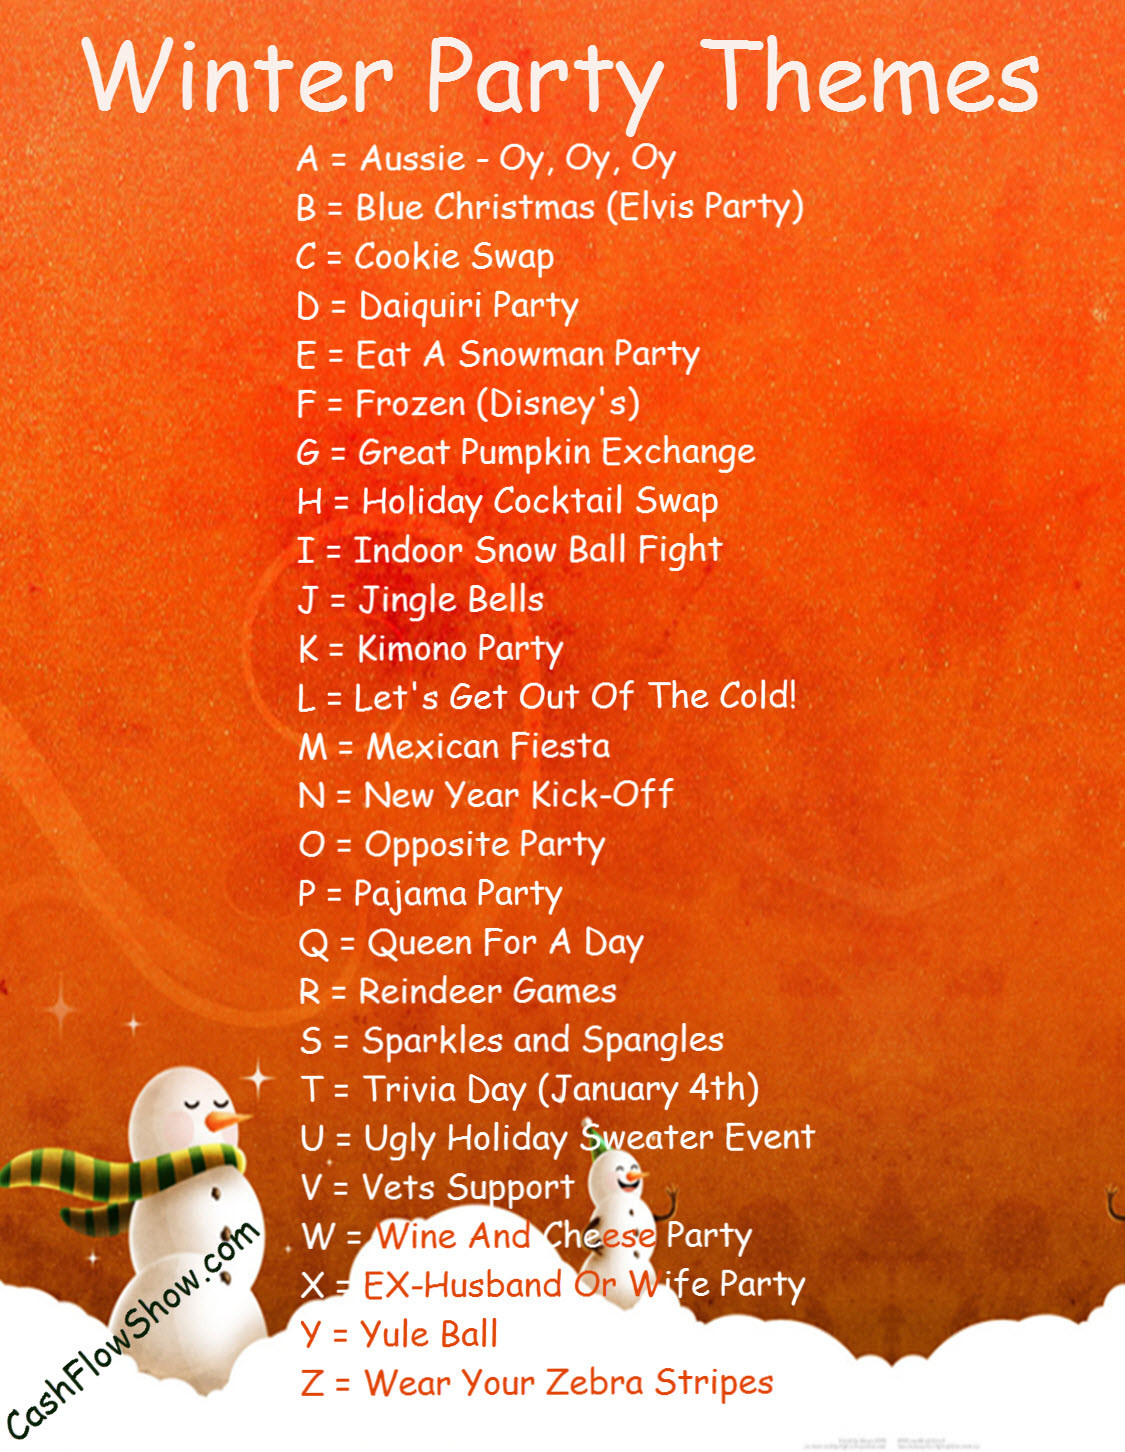 Christmas Party Name Ideas
 Read A Z List To Find A Winter Party Theme For Your Event